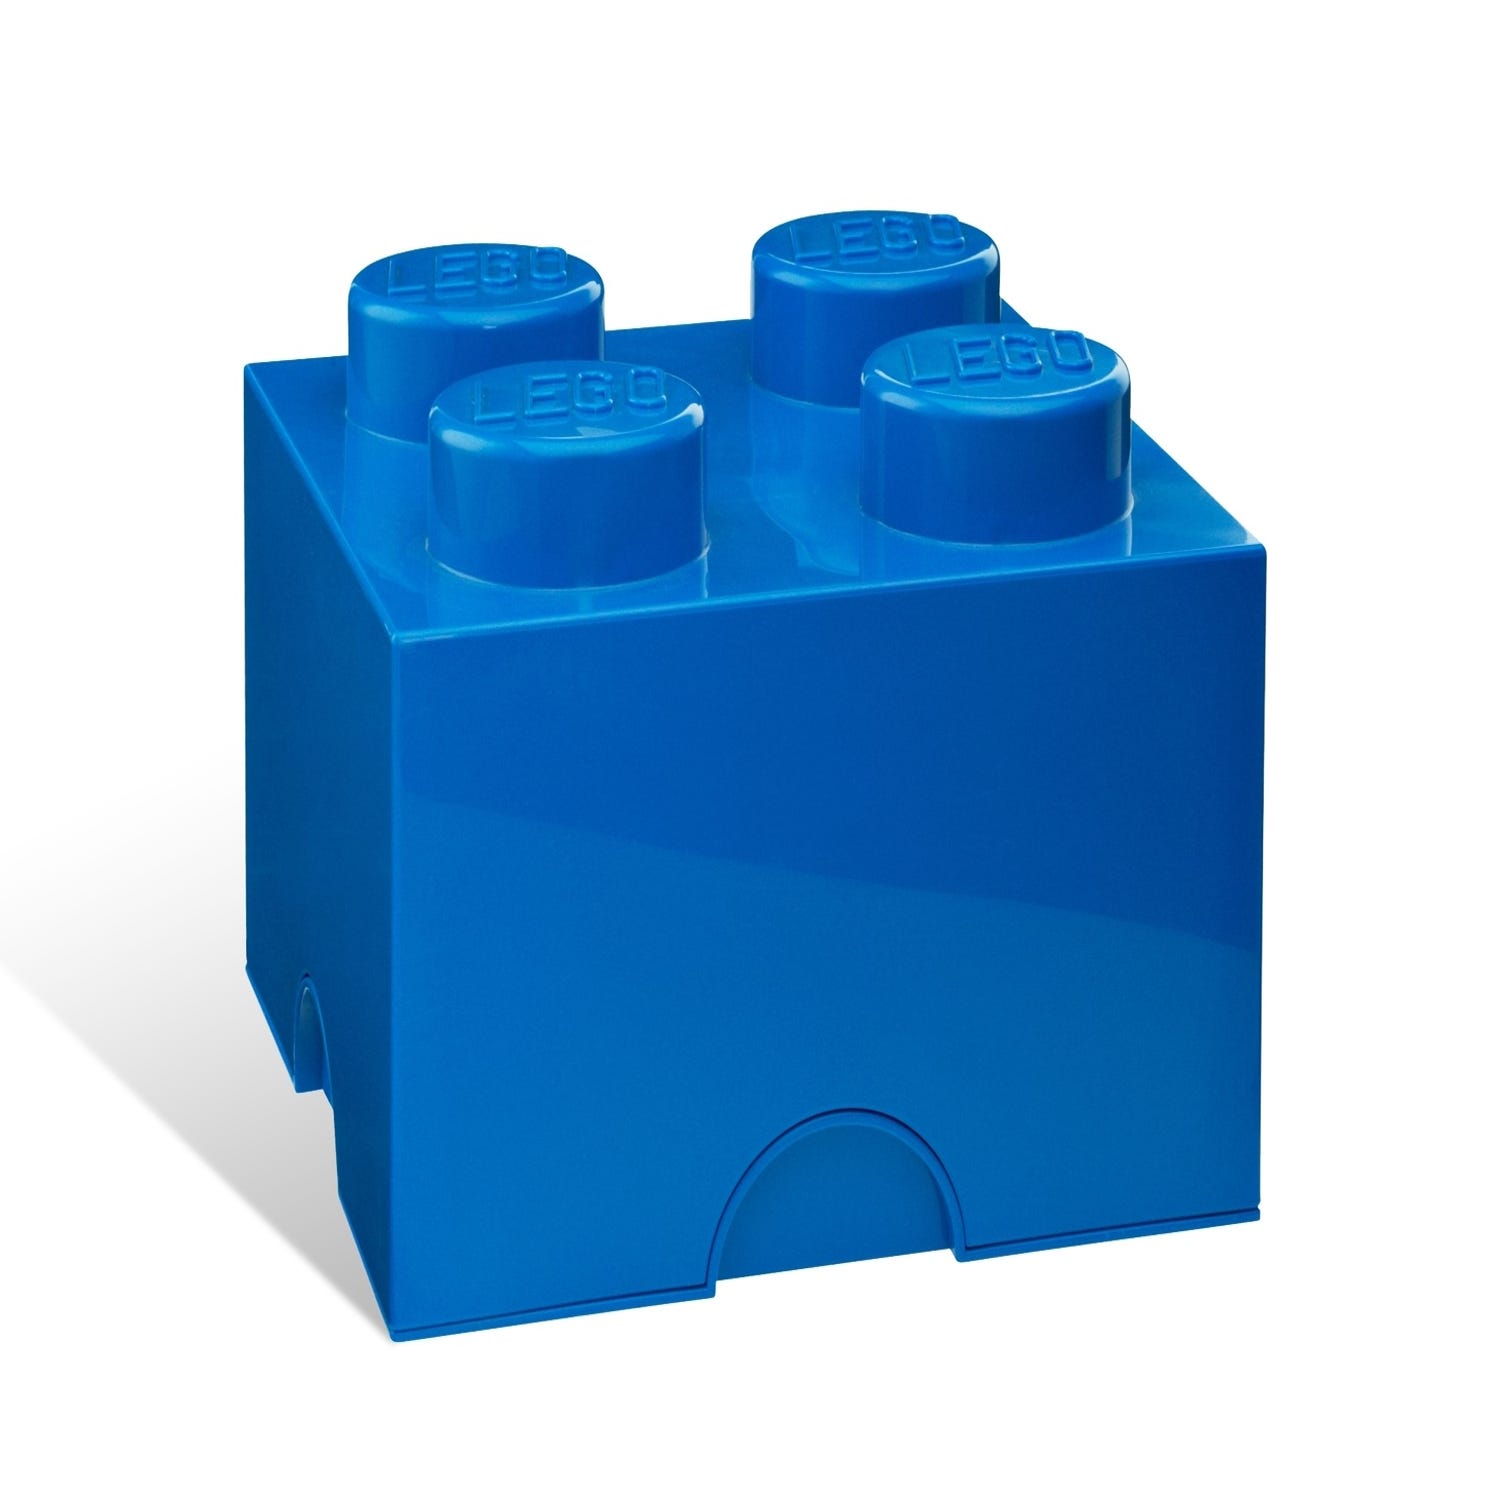 video Smigre dyd LEGO® 4-stud Blue Storage Brick 5001383 | Other | Buy online at the  Official LEGO® Shop US